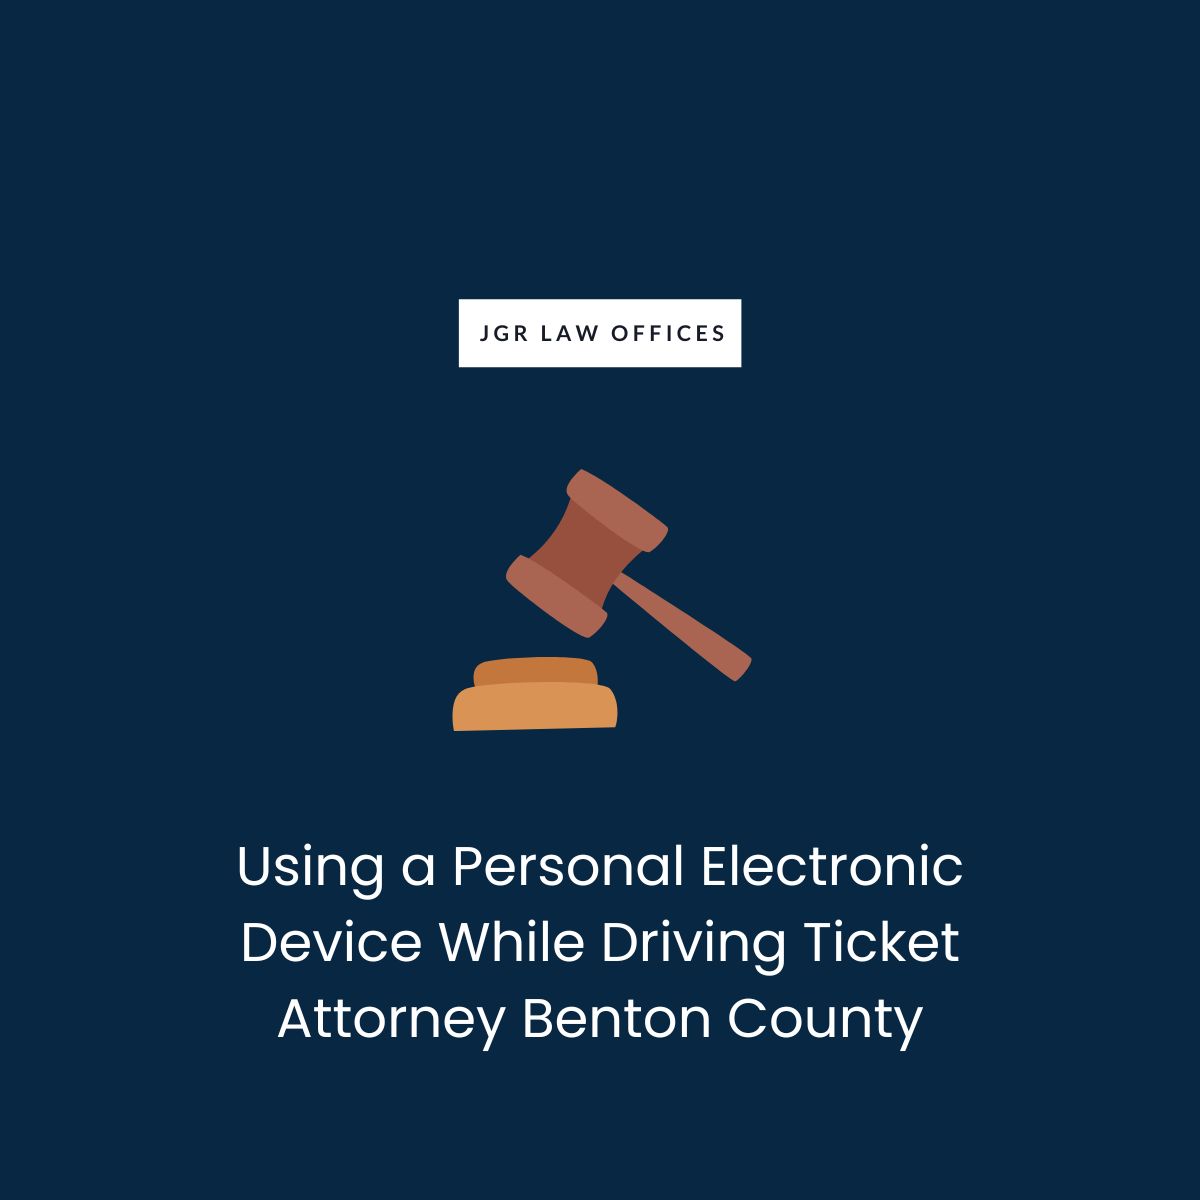 Using a Personal Electronic Device While Driving Ticket Lawyer Benton County